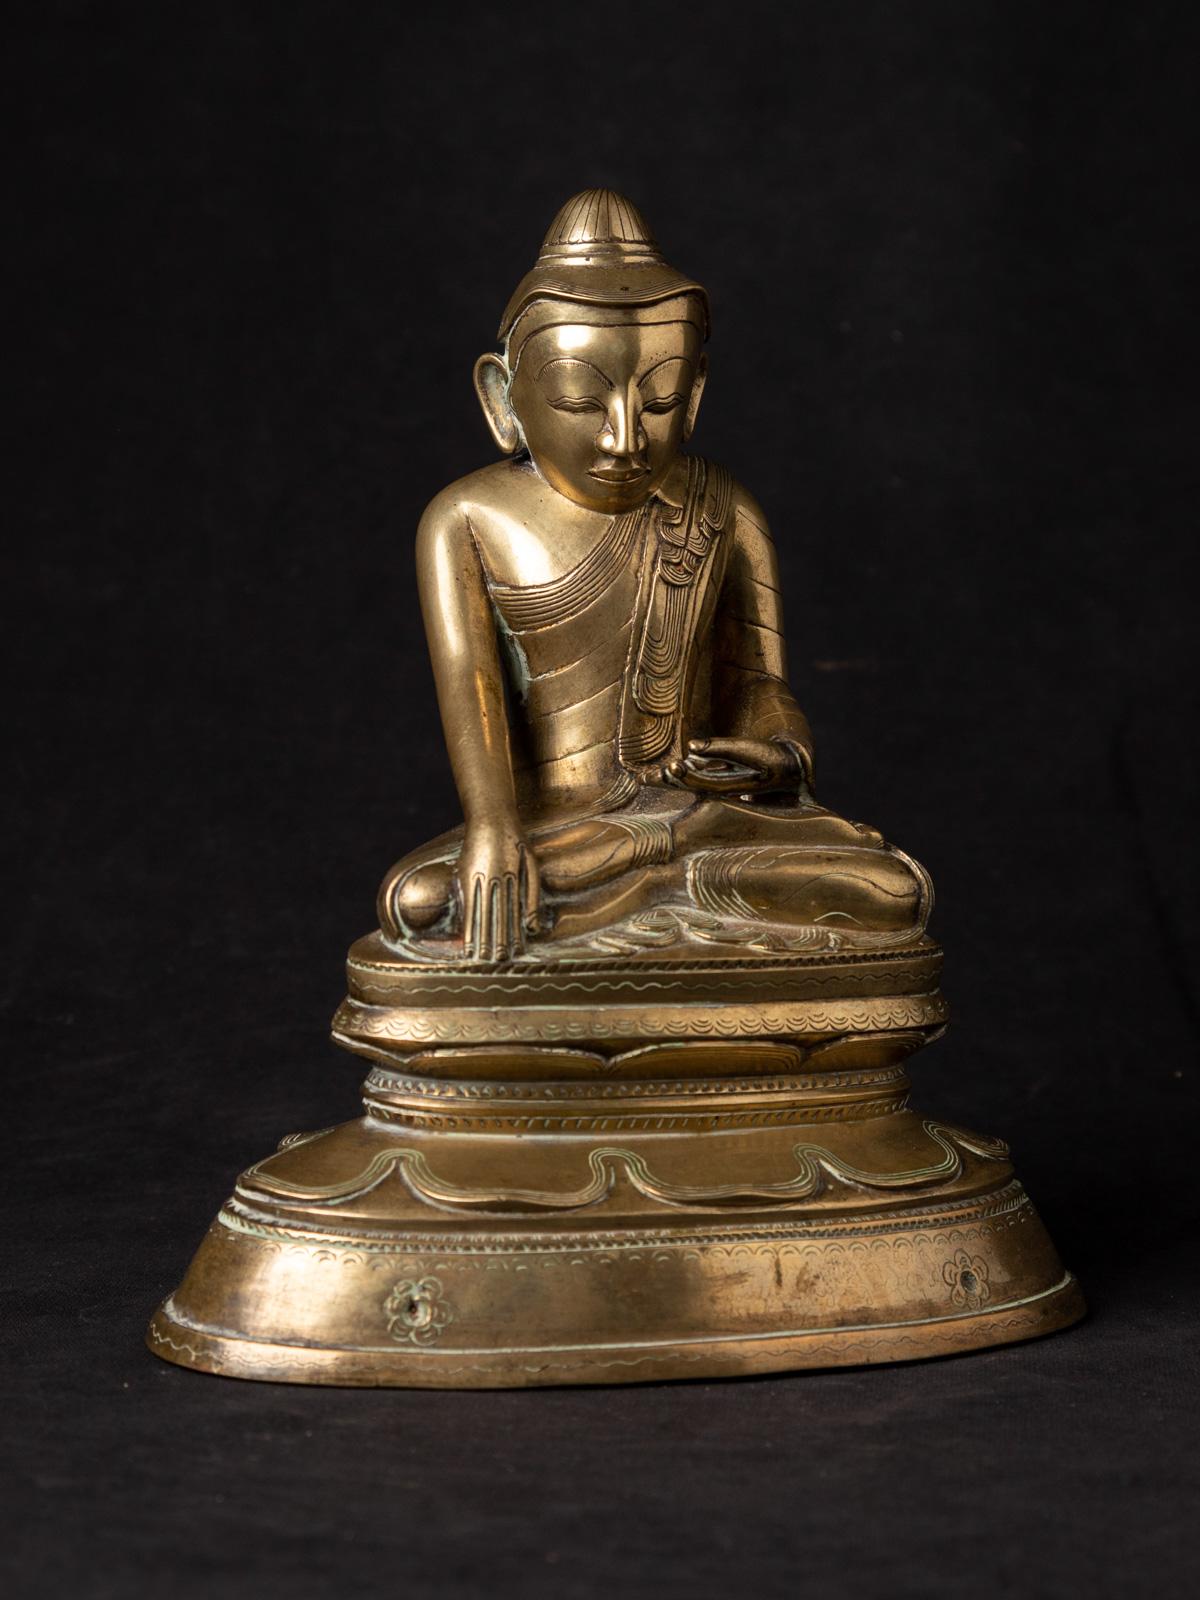 Antique bronze Lotus Buddha statue
Material : bronze
21,3 cm high
18,4 cm wide and 11,3 cm deep
Is also being called 